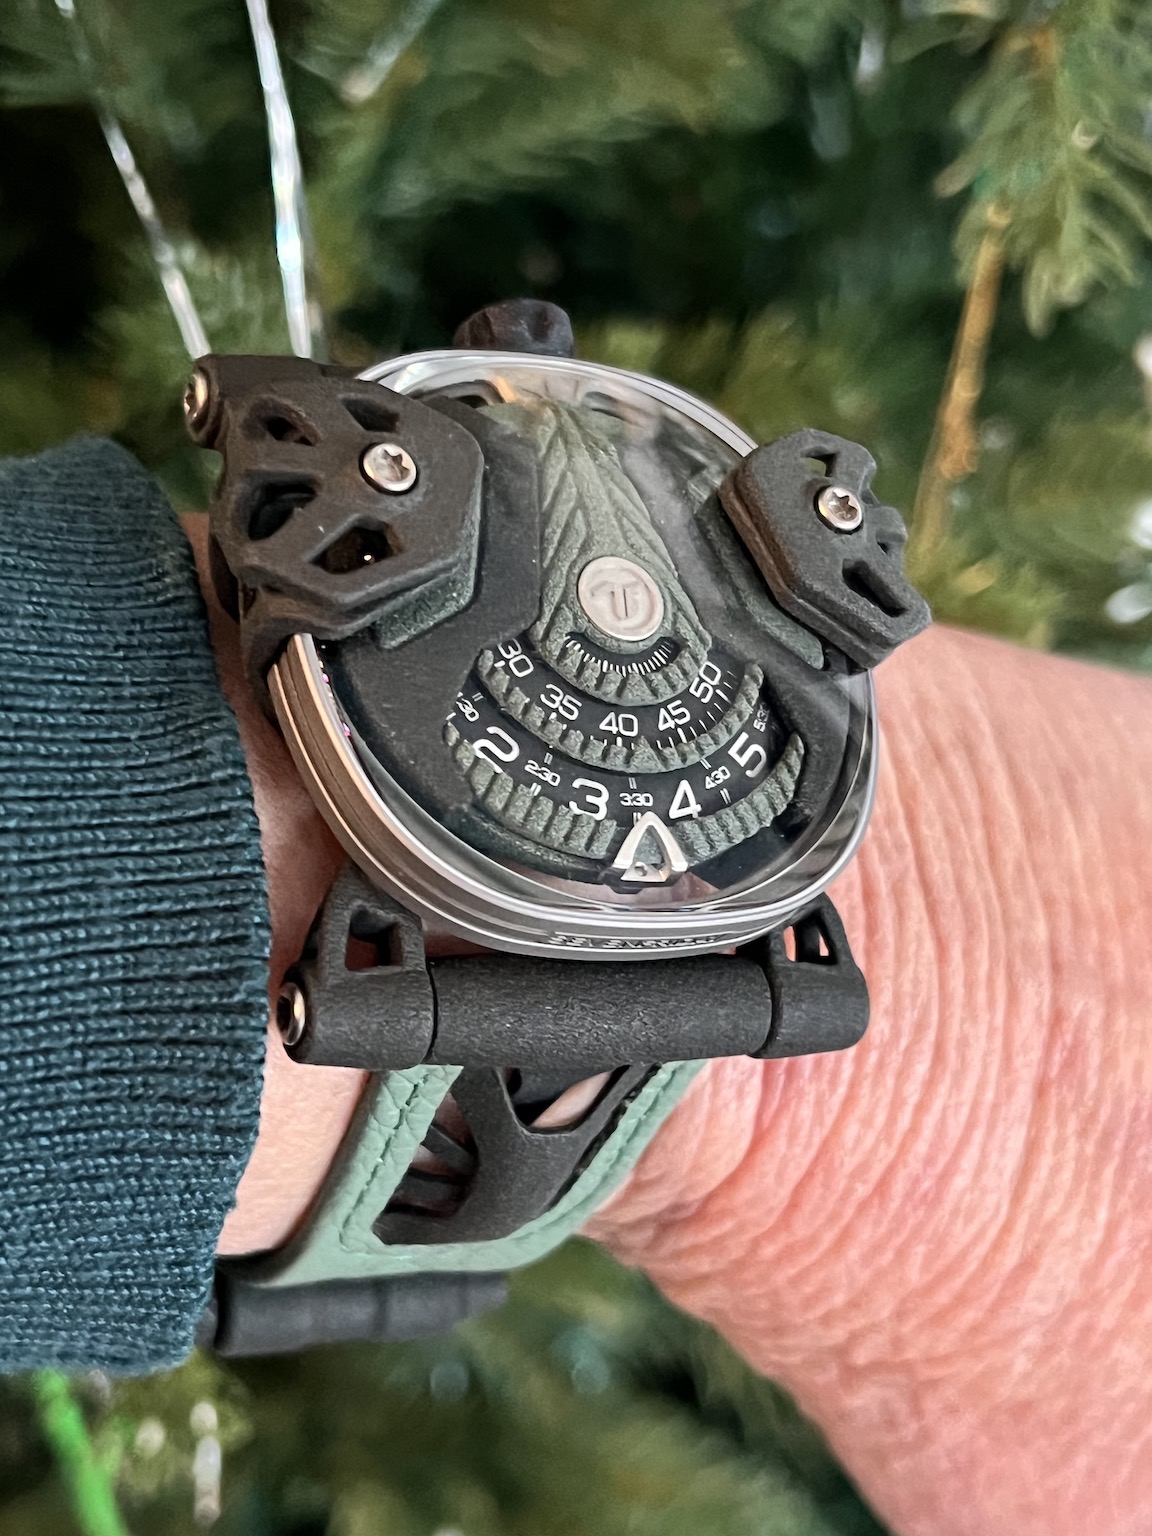 Watch Review: SevenFriday Free-D Green On The Wrist - ATimelyPerspective